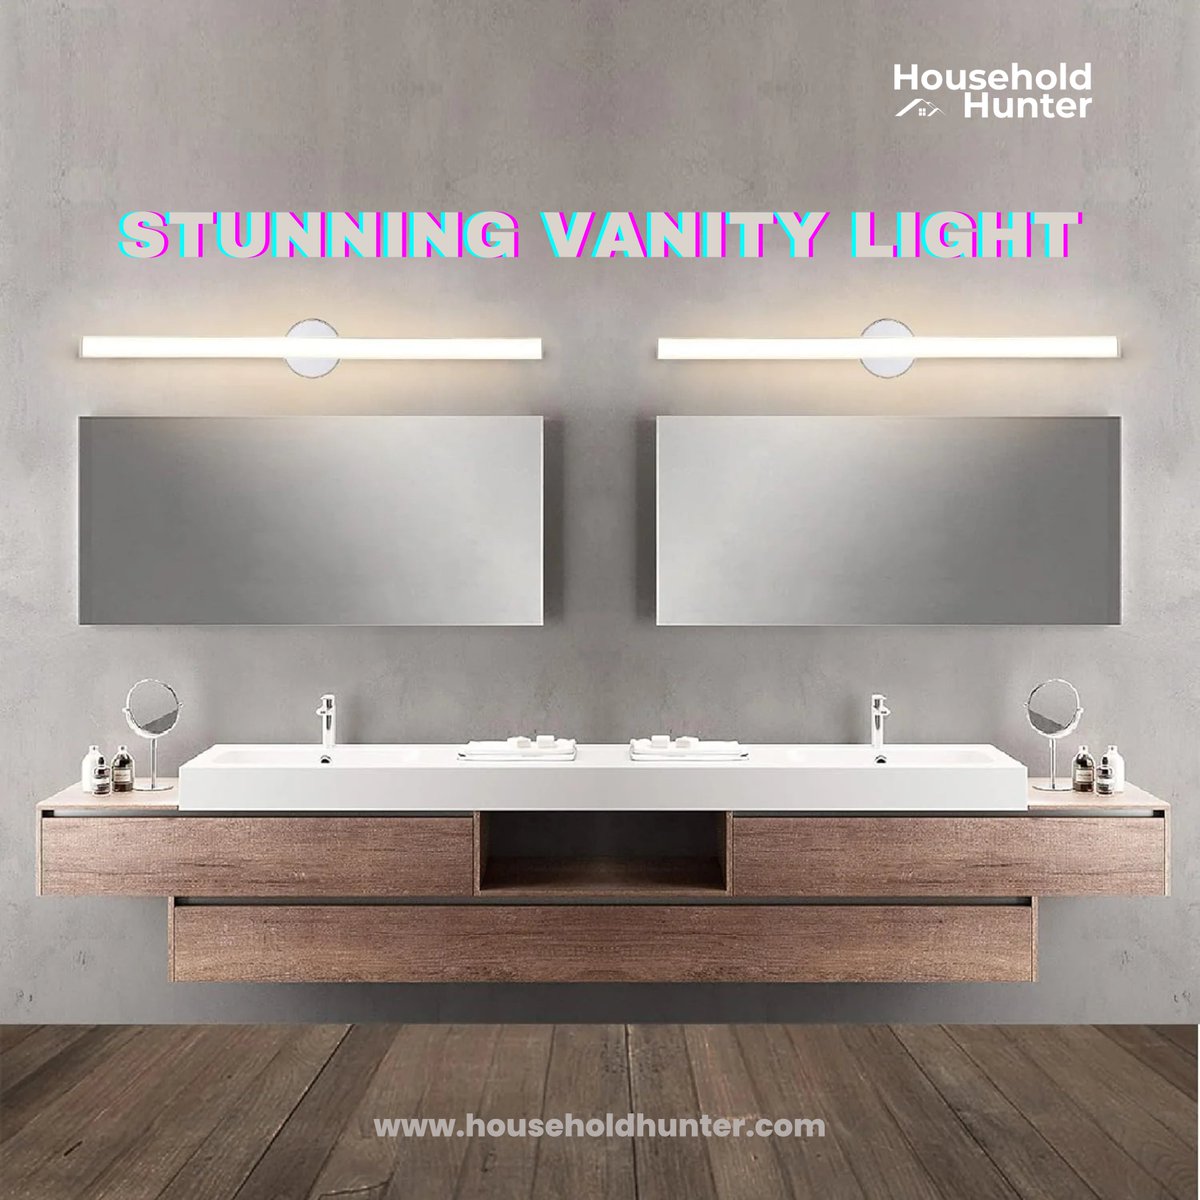 The Elegant Vanity Lights from Household Hunter Will Illuminate Your Beauty Routine!
👉To know more
▶Visit our website: householdhunter.com
▶Customer Support: 678-369-1154
#vanitylight #lighting #style #bathroomdecor